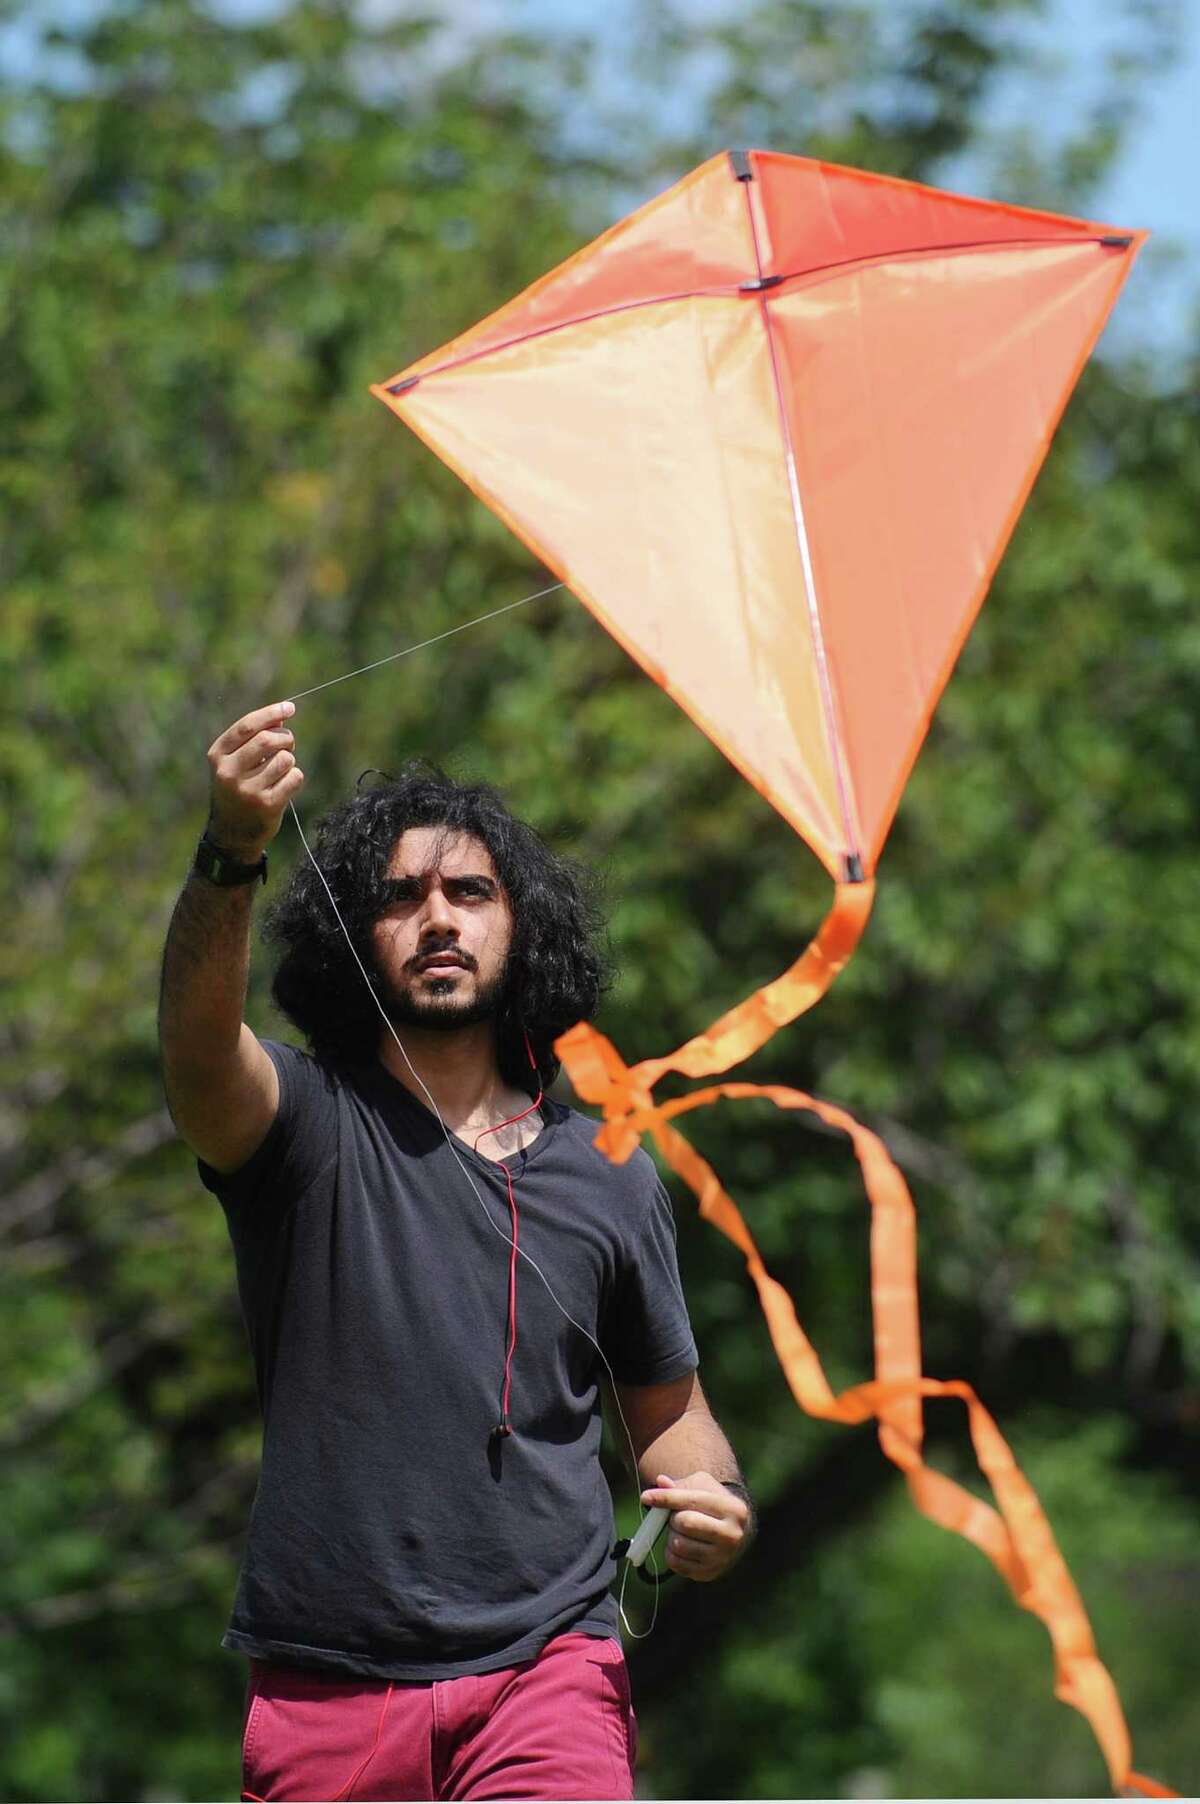 19-year-old Mohammad Faisal Vasanwala, of Stamford, flies a kite during the India Day Festival at Mill River Park in Stamford, Conn. on Sunday, August 13, 2017.